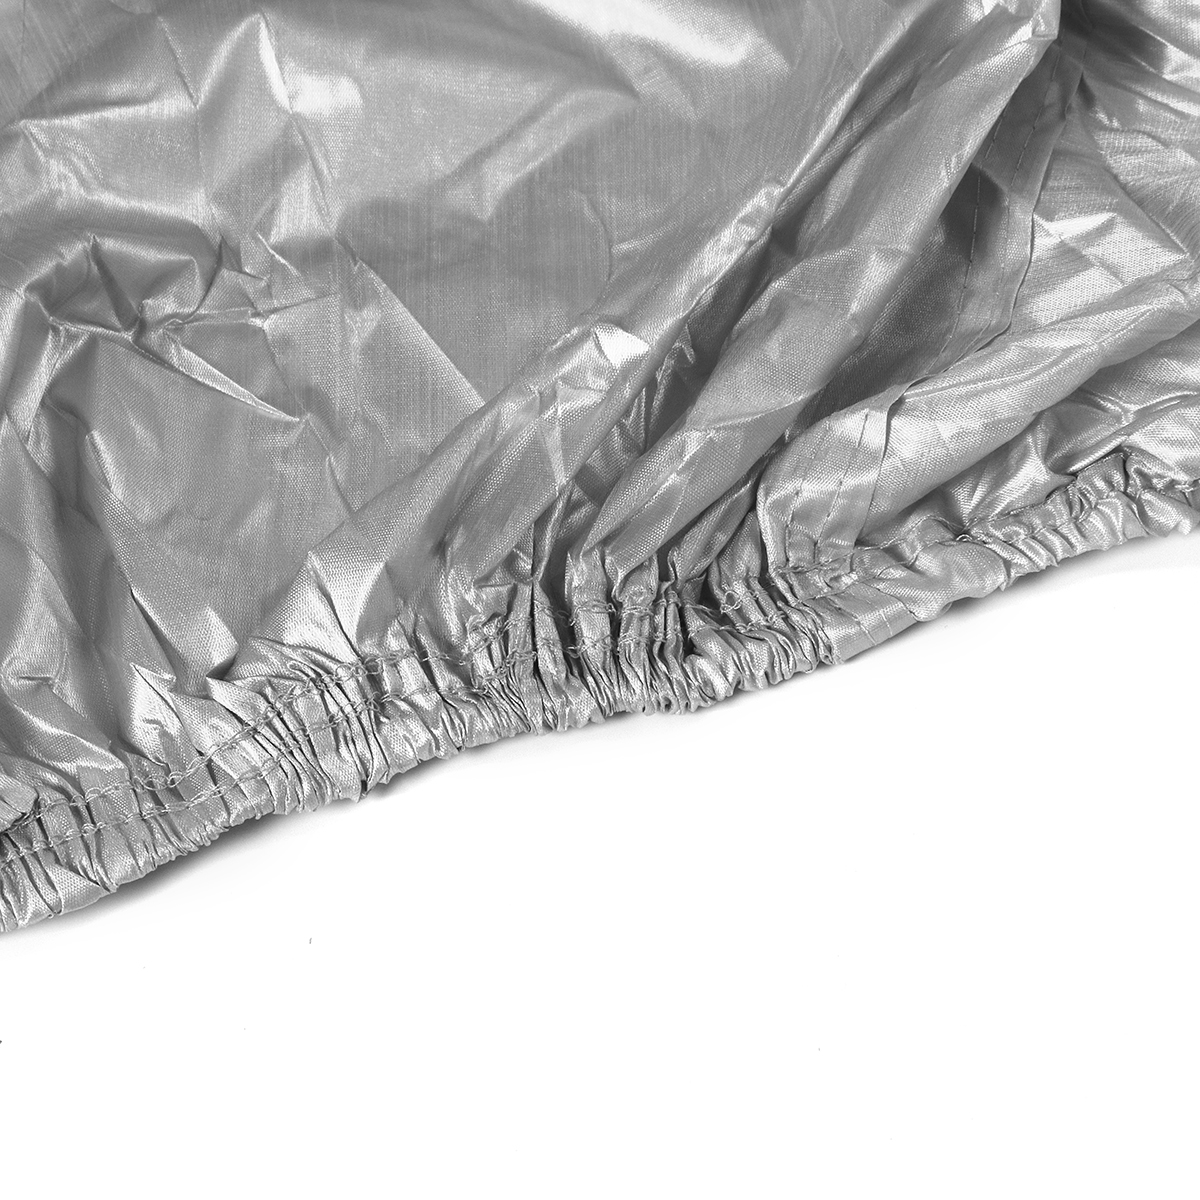 5.1*1.9*1.5M Full Car Cover for Saloon Waterproof Outdoor Dust UV Rain Protector